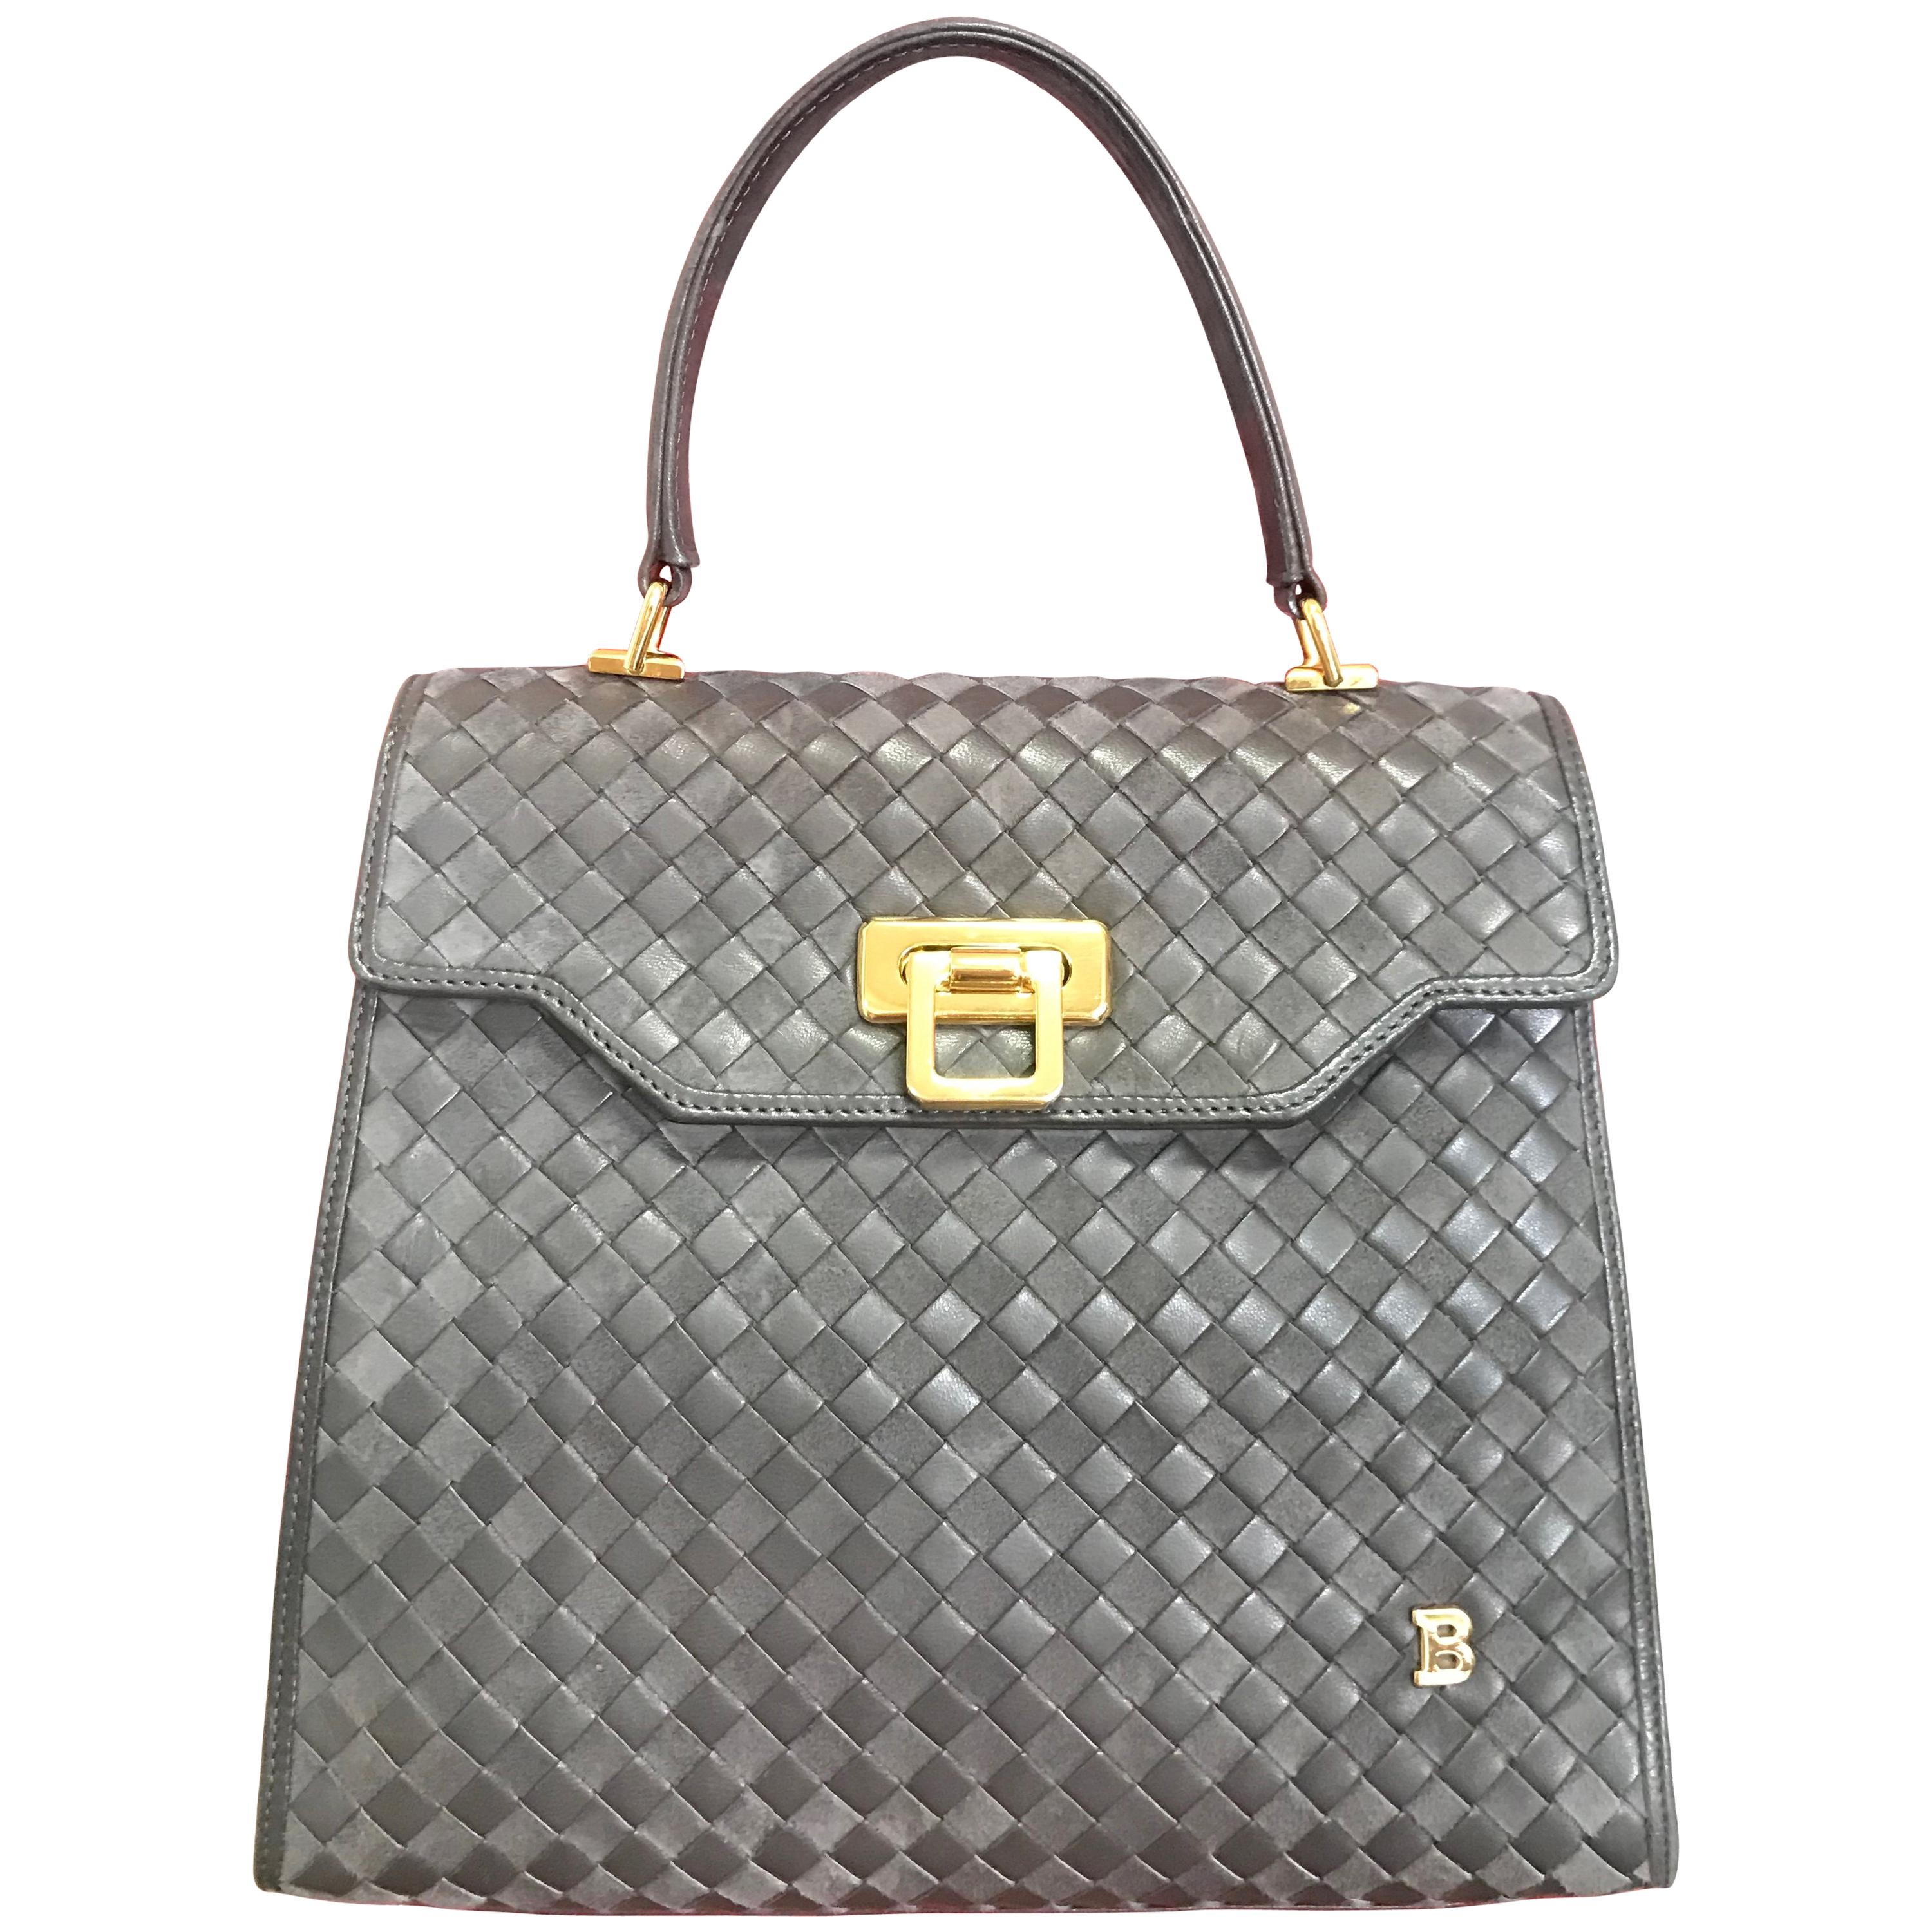 Vintage Bally taupe grey intrecciato leather kelly handbag with gold tone logo. For Sale